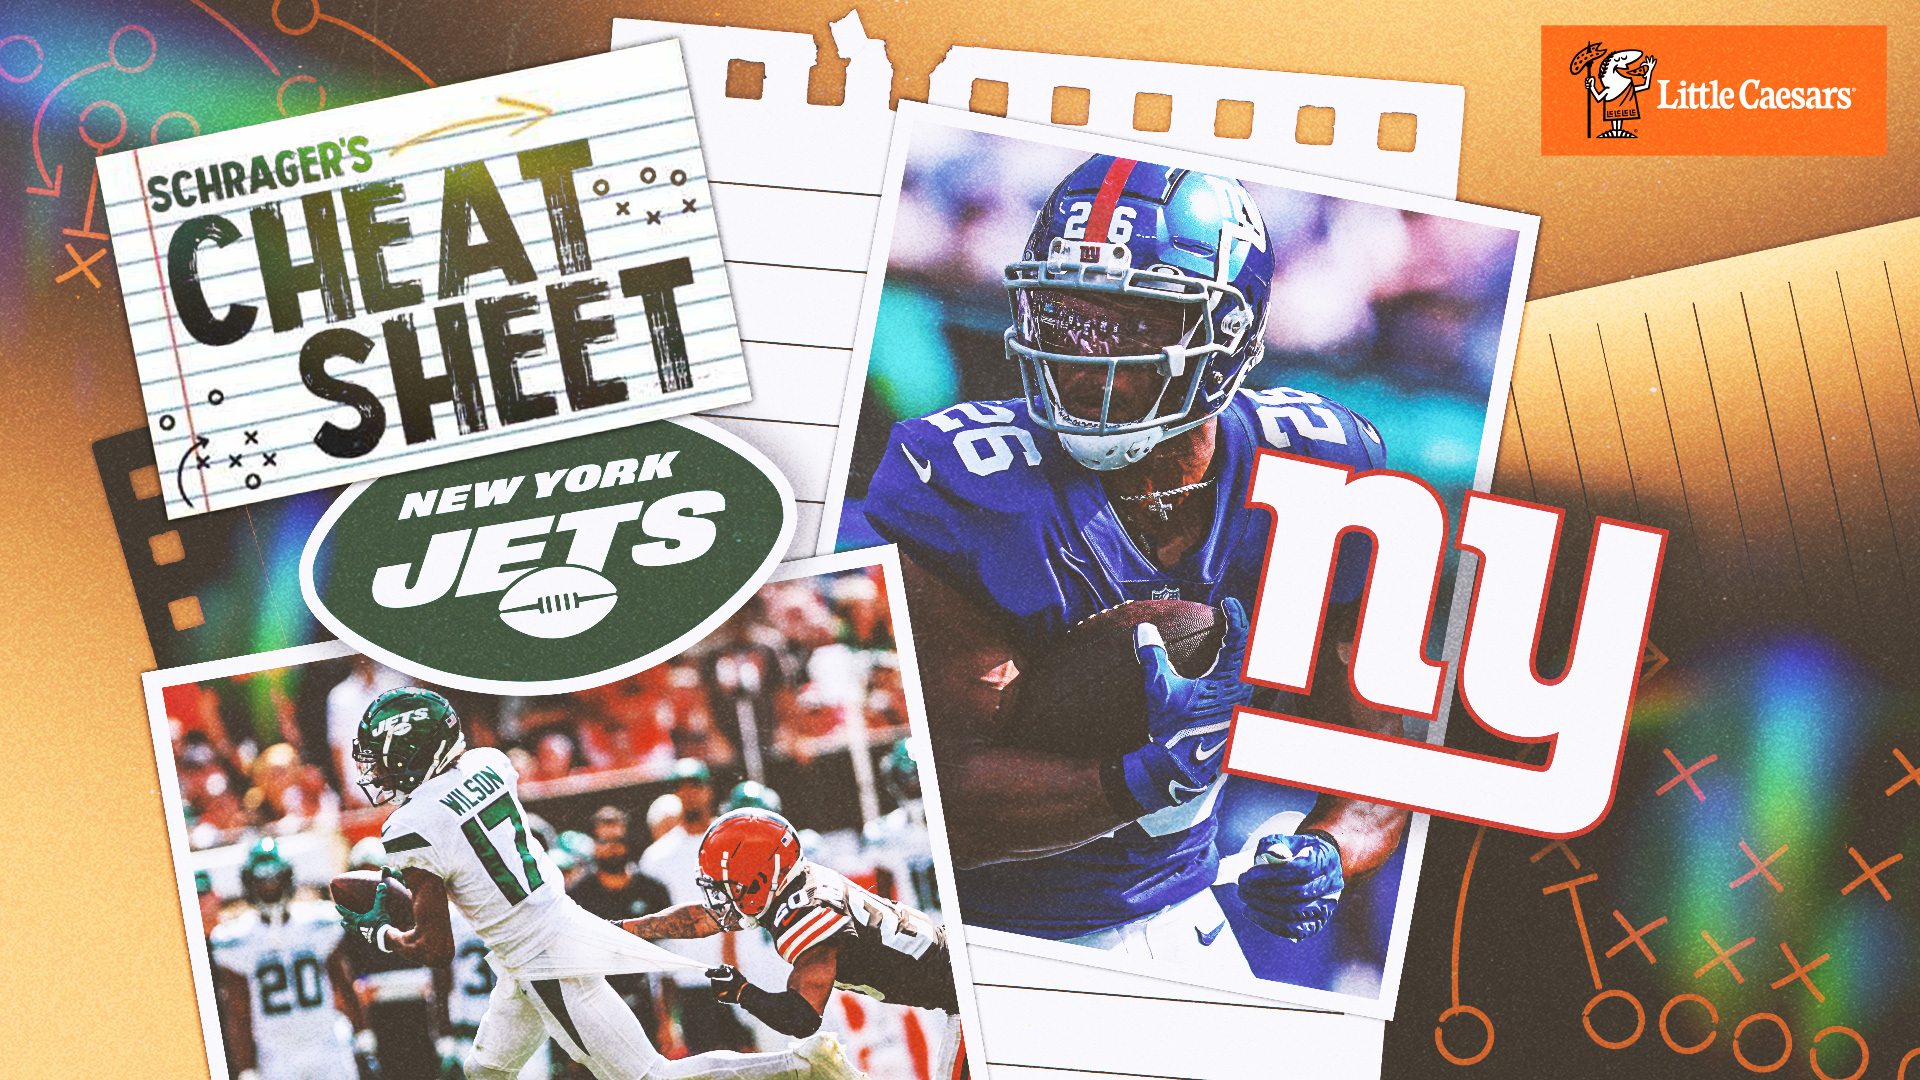 Jets, Giants have New York buzzing: Peter Schrager's Cheat Sheet